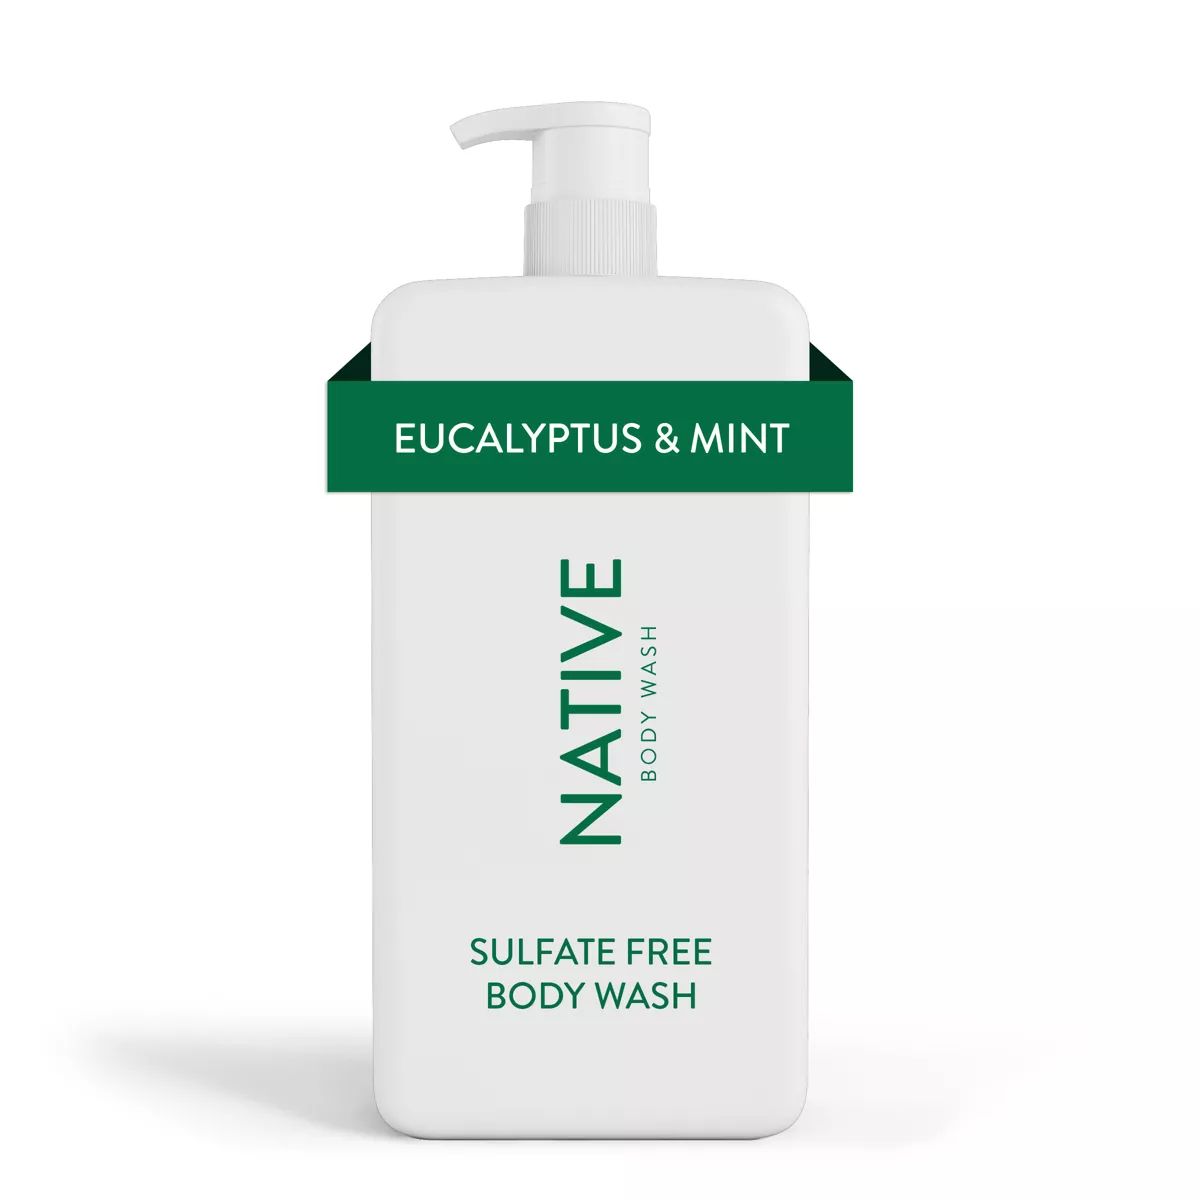 Native Body Wash with Pump - Eucalyptus & Mint - Sulfate Free - 36 fl oz | Target